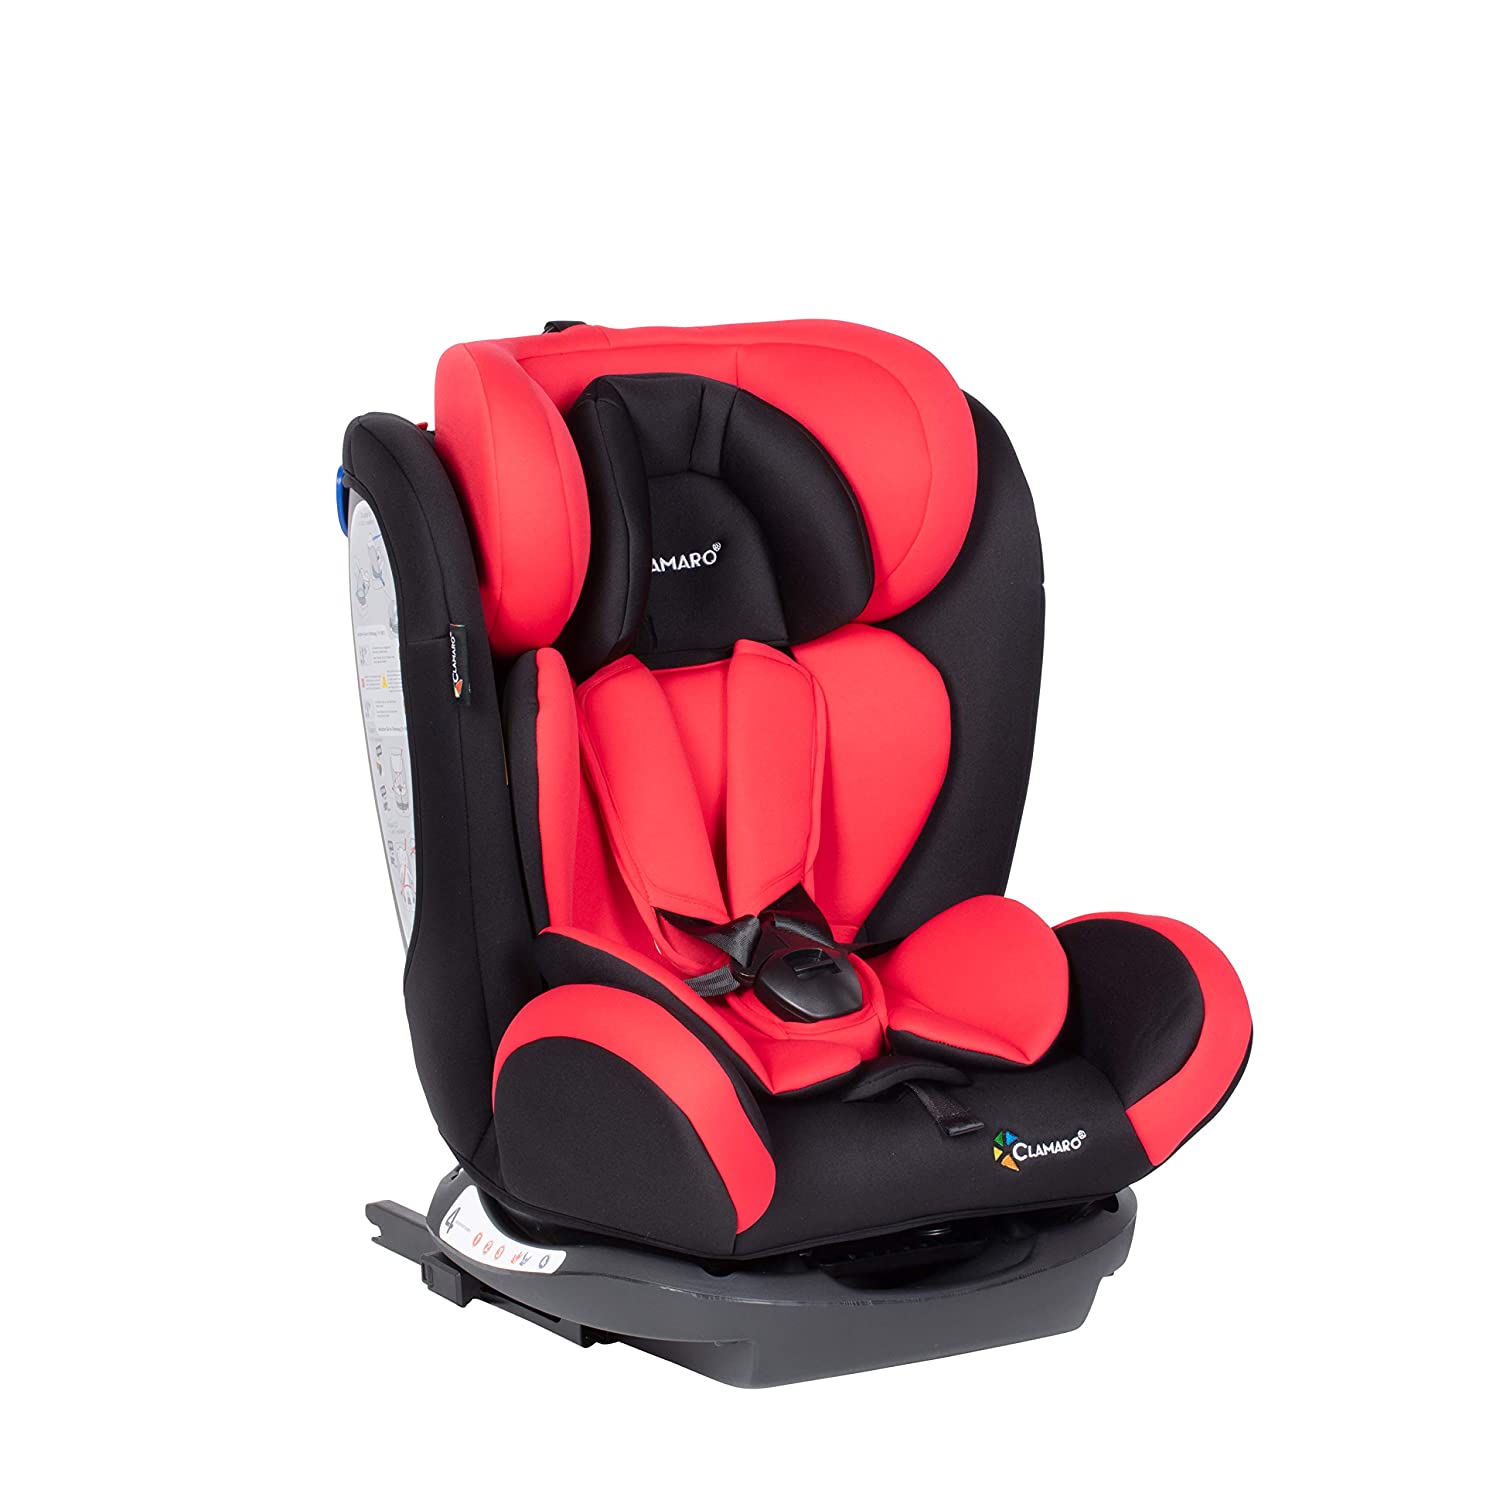 Clamaro \'Ranger 4-in-1\' Isofix Child Car Seat Group 0+, I, II and III (0-36 kg) Grows with Baby and Child Car Seat from 0 to 12 Years, Adjustable Headrest and Backrest, Black/Red